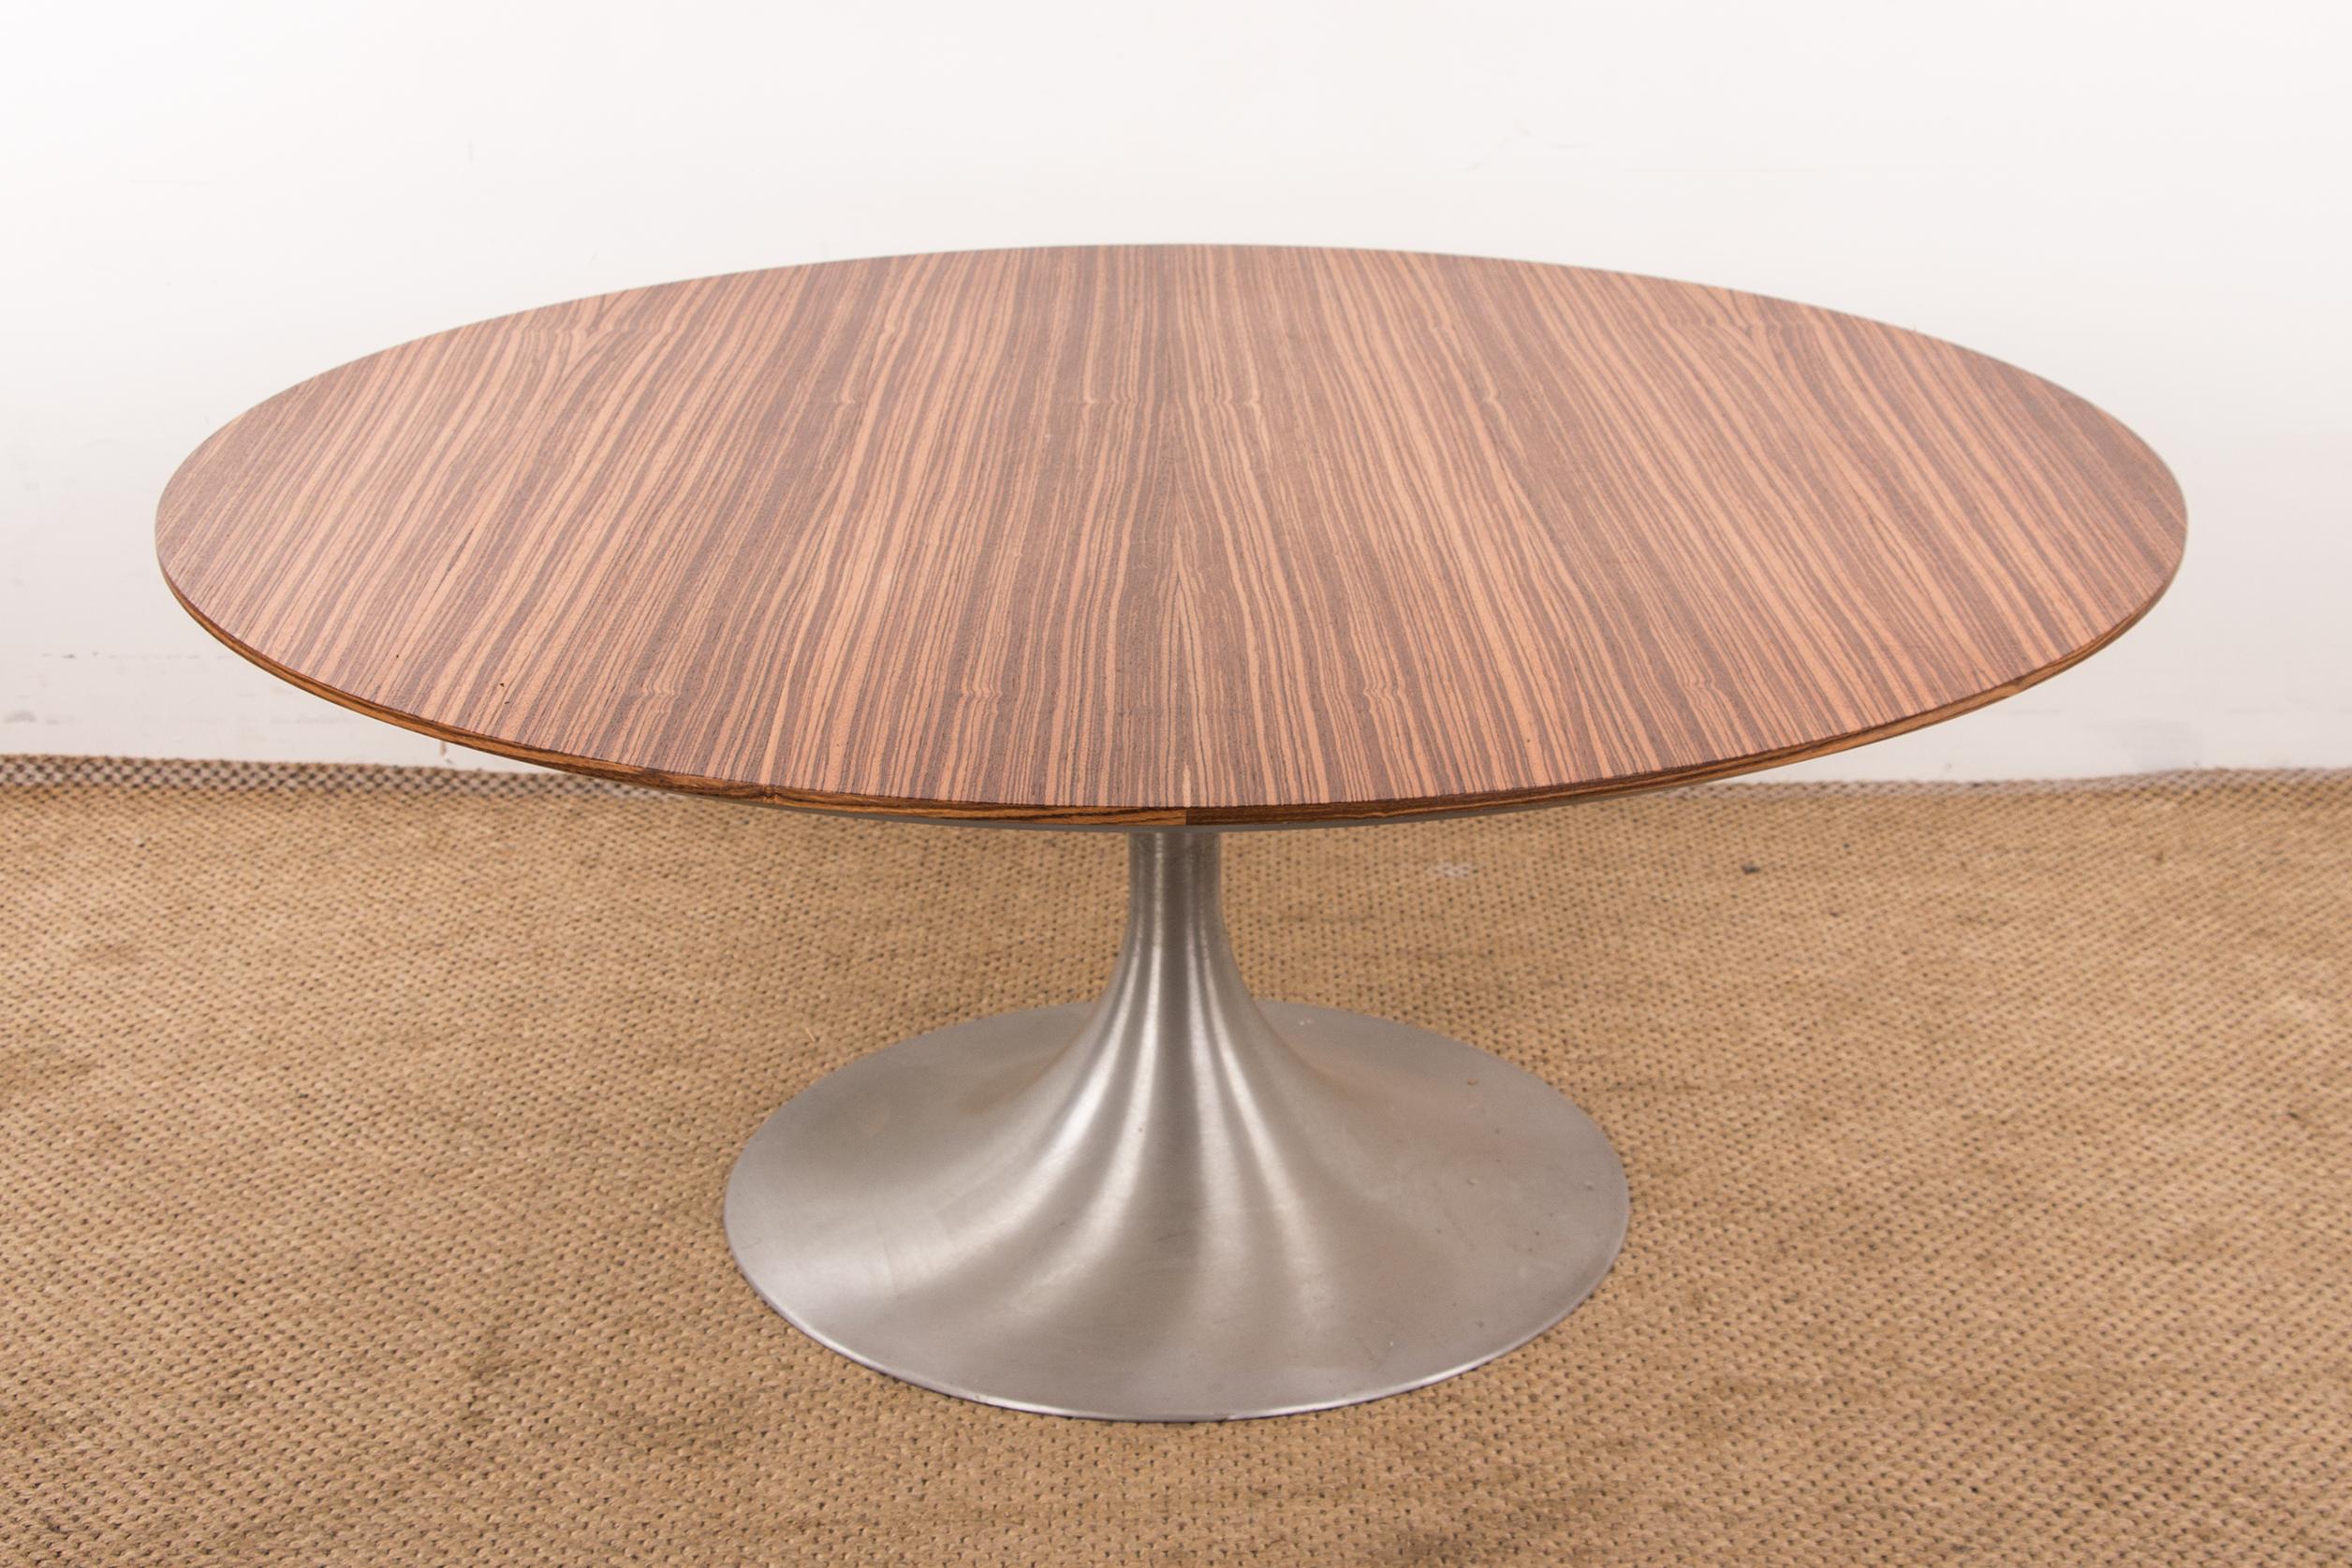 Superb coffee table in the style of Pierre Paulin or Eero Saarinen. 
With its Tulip base and its rare wooden top it offers a very sober and elegant design. 
The edge of the tray is slightly curved inwards and silver in color.